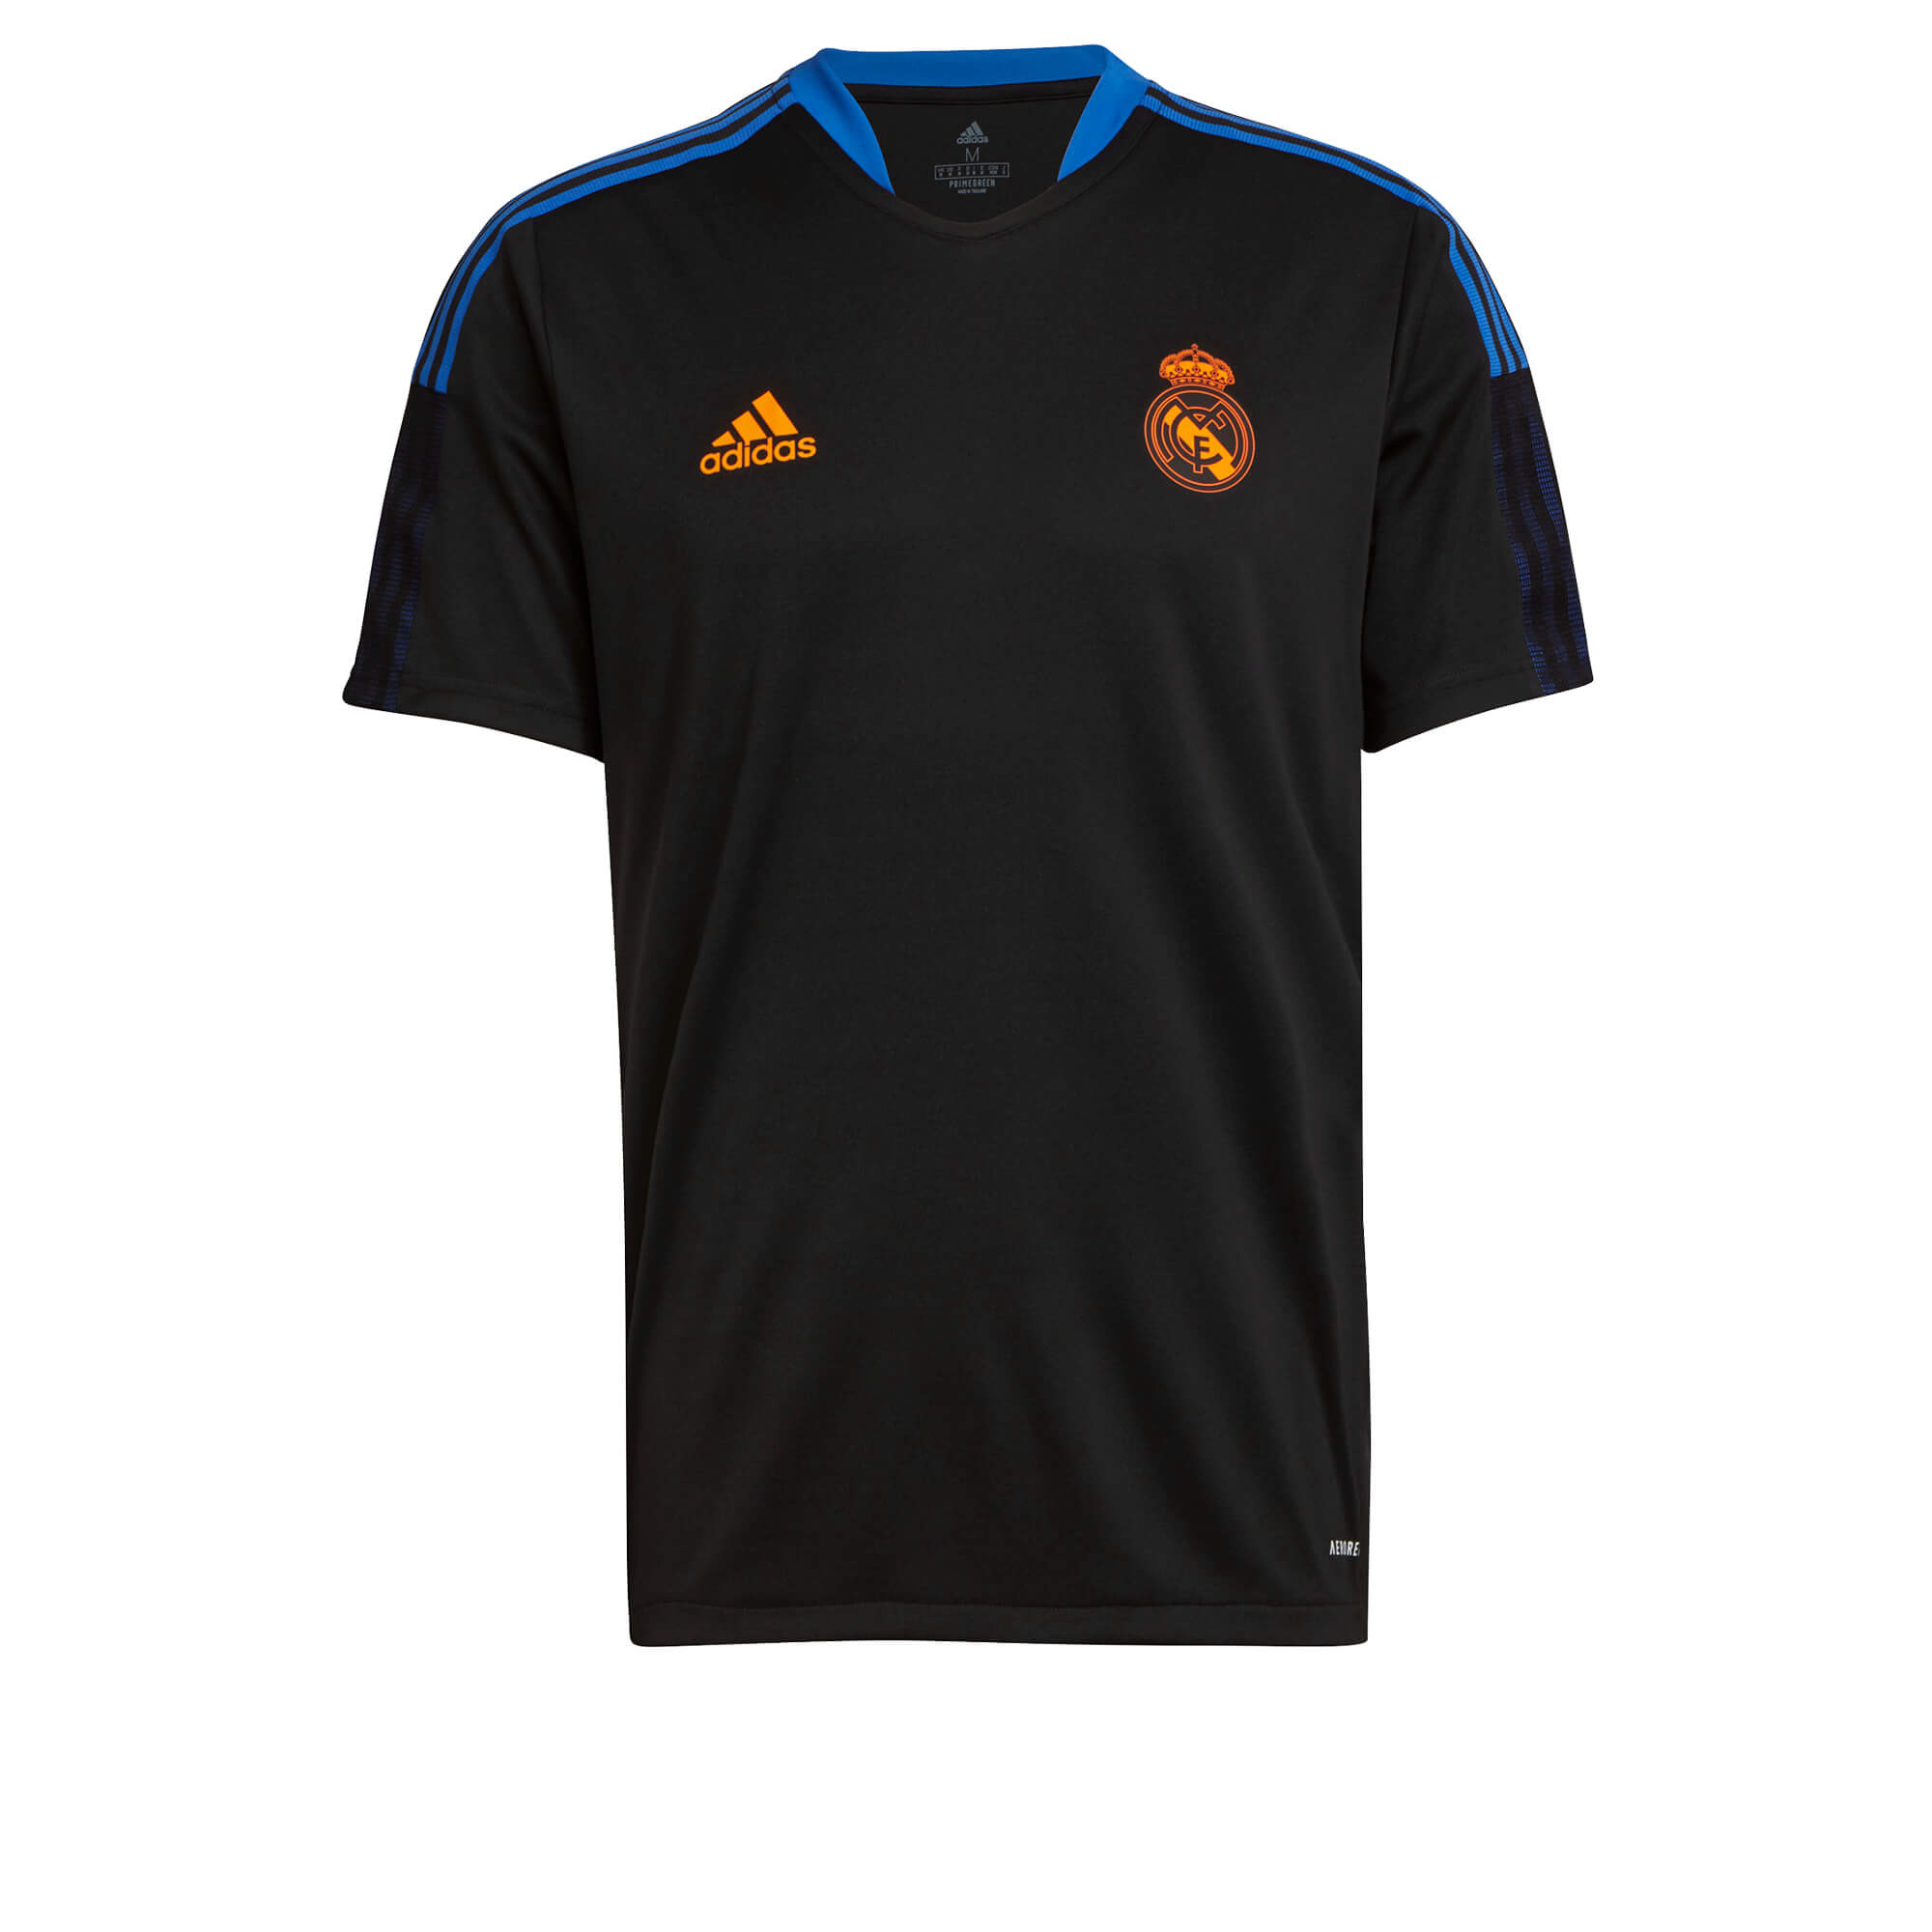 ADIDAS REAL MADRID MAILLOT ENTRAINEMENT NOIR 2021/2022